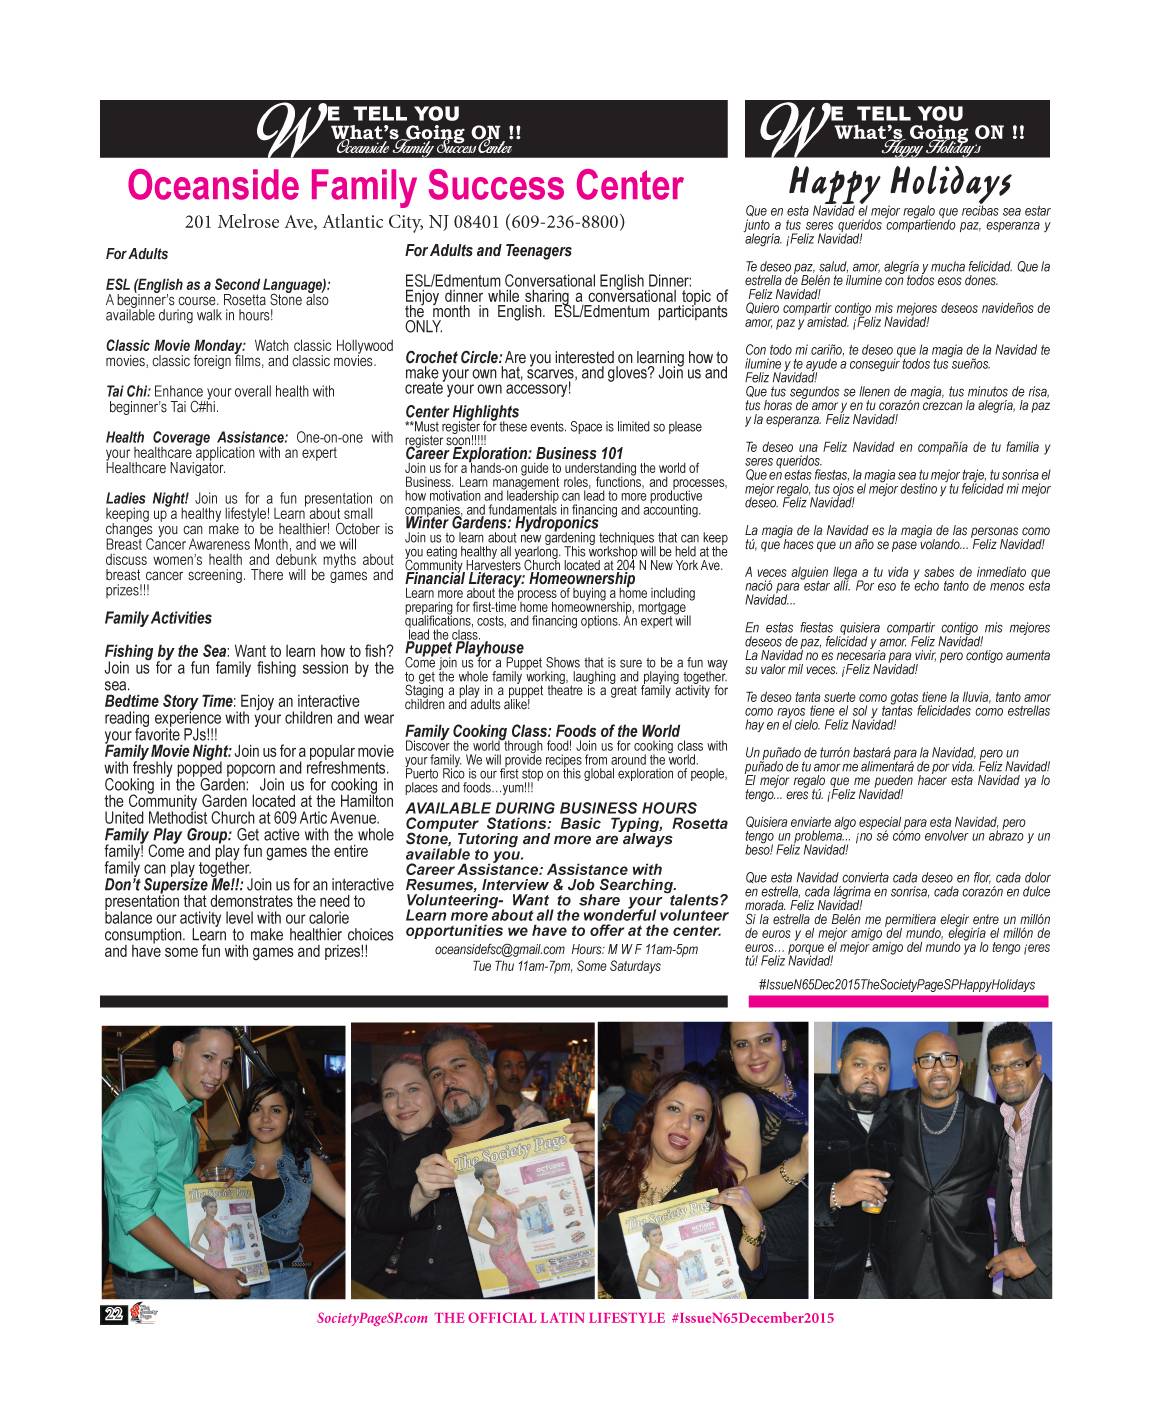 Oceanside Family Success Center / Happy Holidays